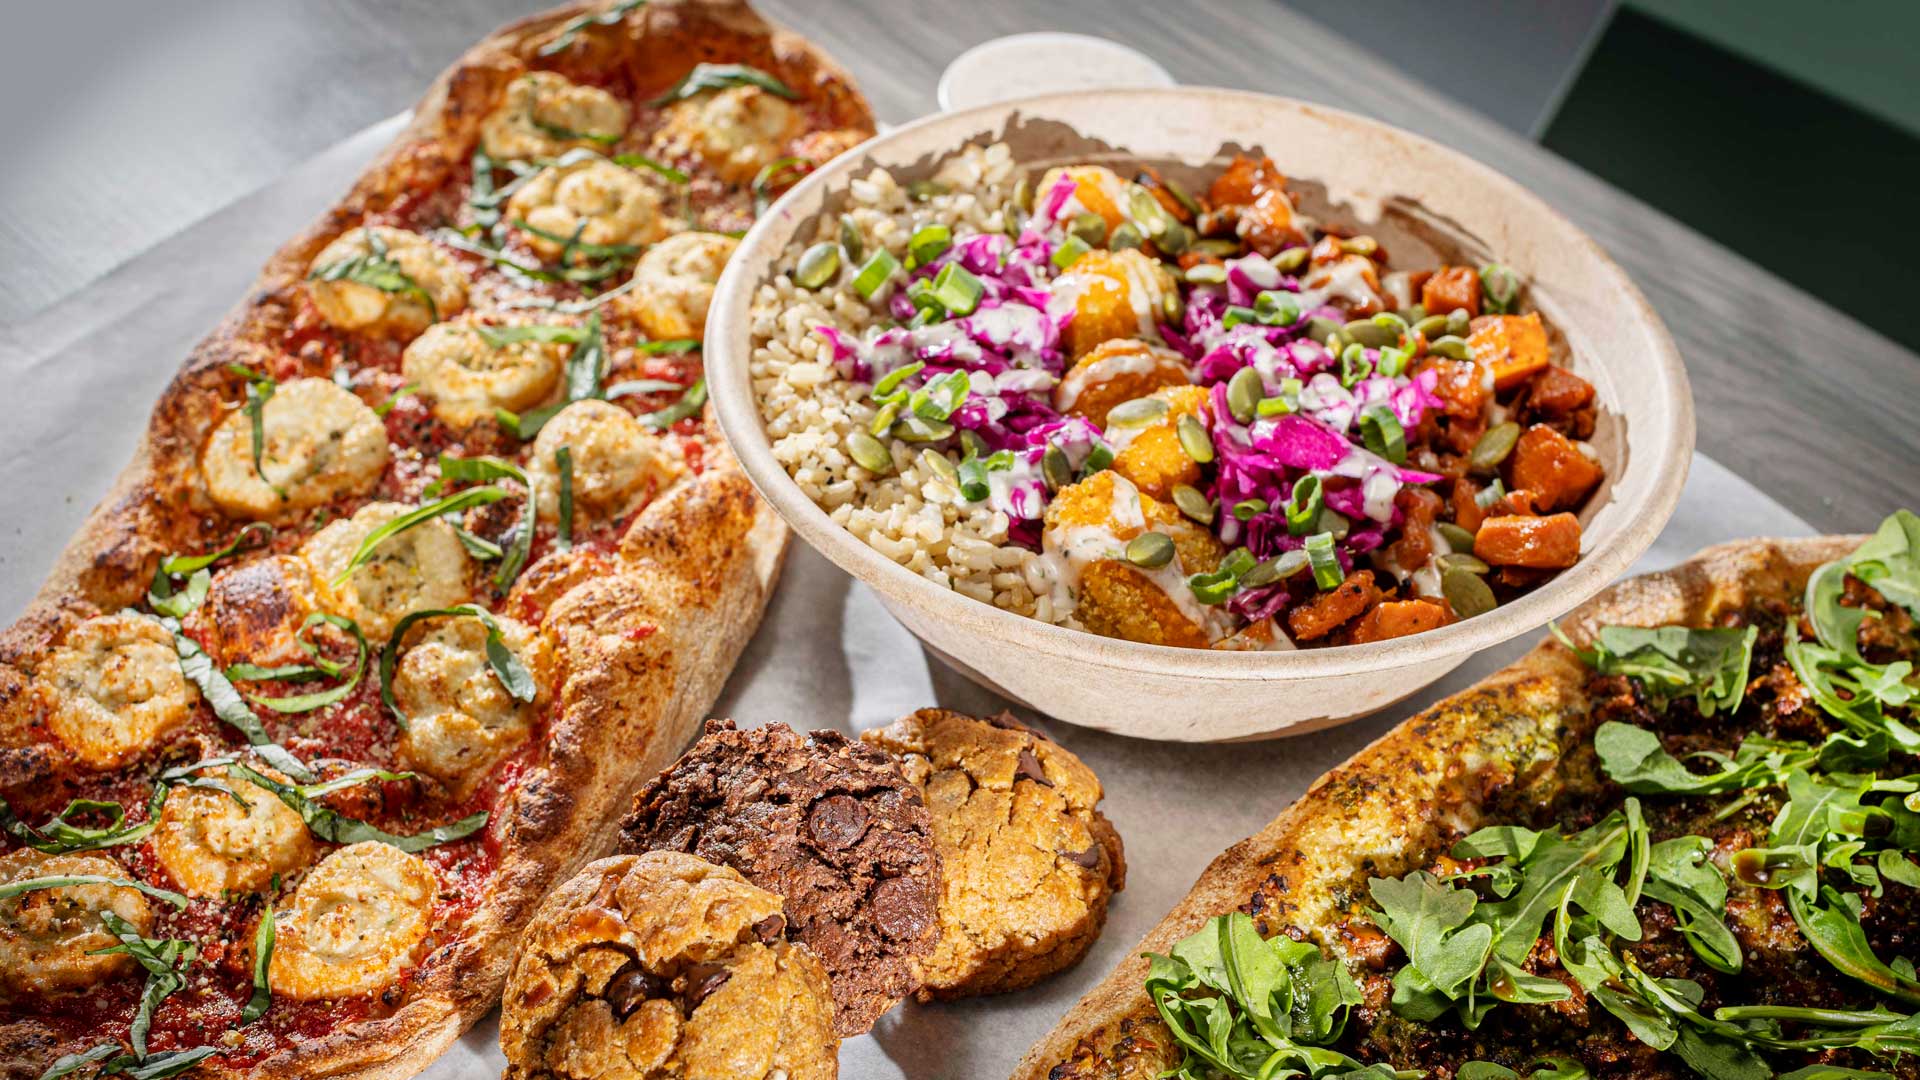 Menu offerings at Florish Plant-Based Pizza &amp; Bowls include, from left, the Margherita Pizza, Buffalo Soul Bowl, Sausage Pesto Pizza and homemade cookies. (Photography by Gabriel Burgos)